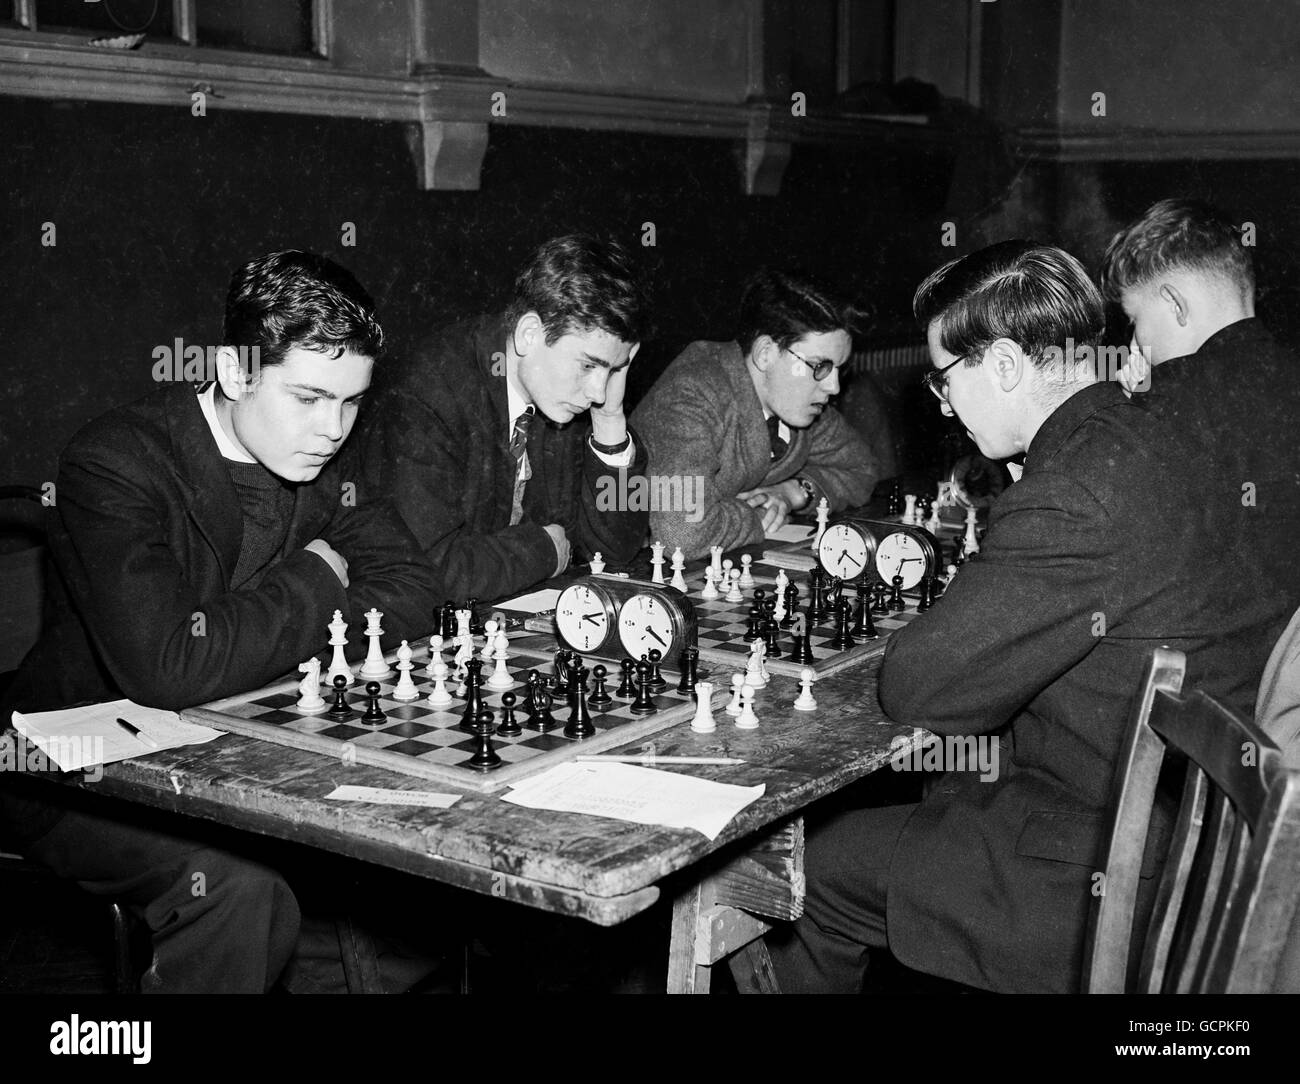 (L-R) P.A. Hampson of Kent, G.C. Warner of Sussex, A.Baker of Oxfordshire and S Golding of Essex during the Junior Chess Championships held at the church institute, Romford Road, Stratford, London. Stock Photo